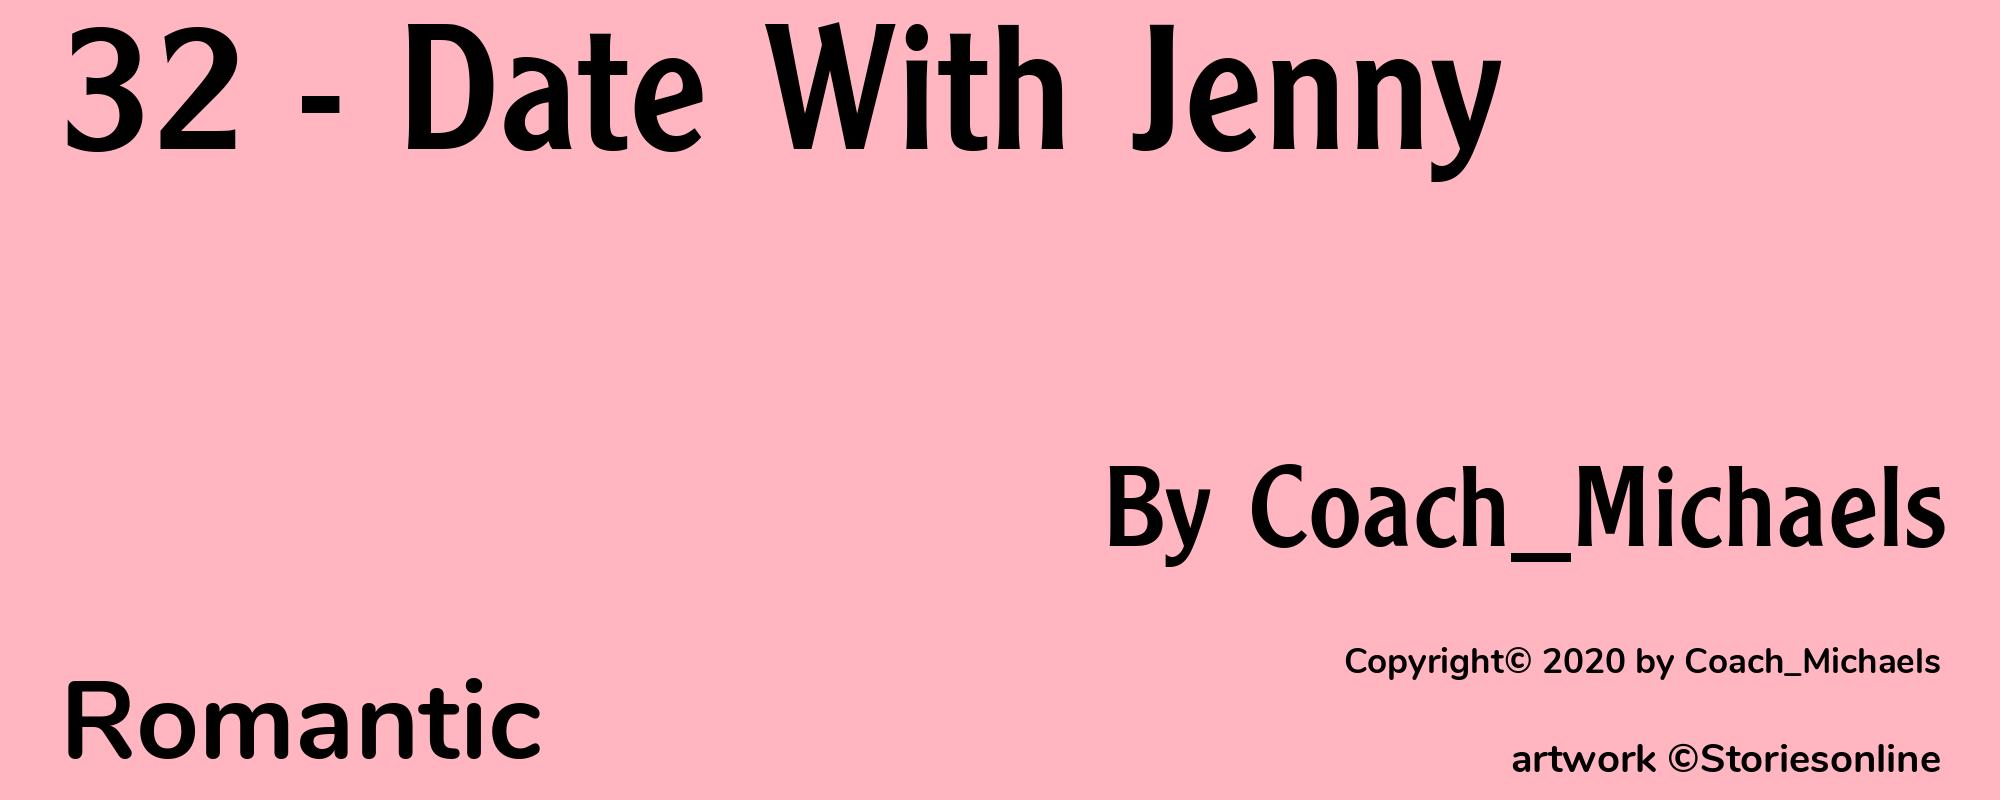 32 - Date With Jenny - Cover